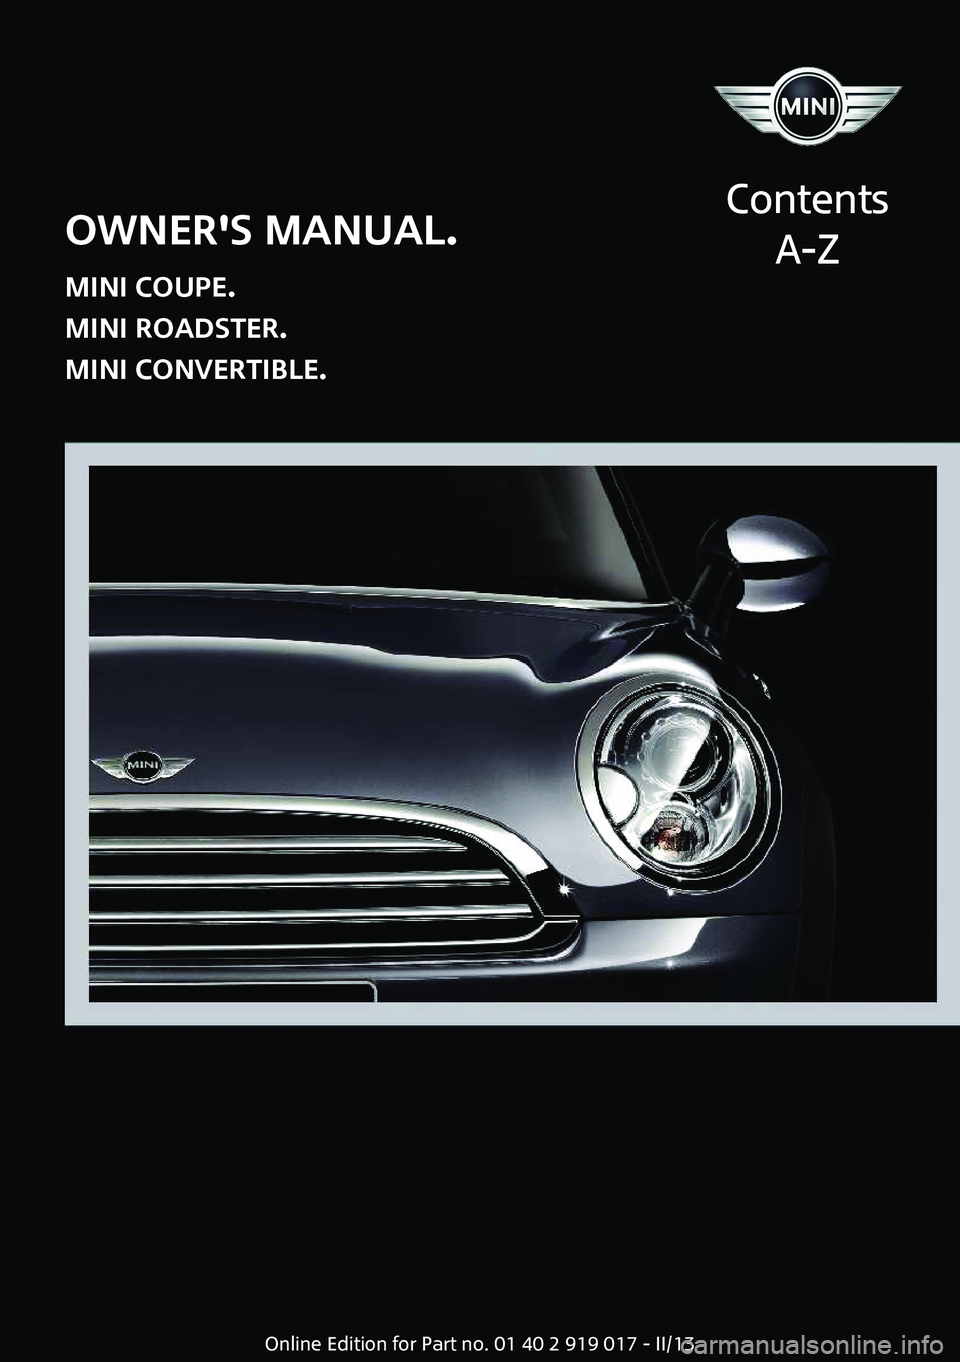 MINI COUPE ROADSTER CONVERTIBLE 2013  Owners Manual Owner's Manual.
MINI Coupe.
MINI Roadster.
MINI Convertible.
Contents
A-ZOnline Edition for Part no. 01 40 2 919 017 - II/13  